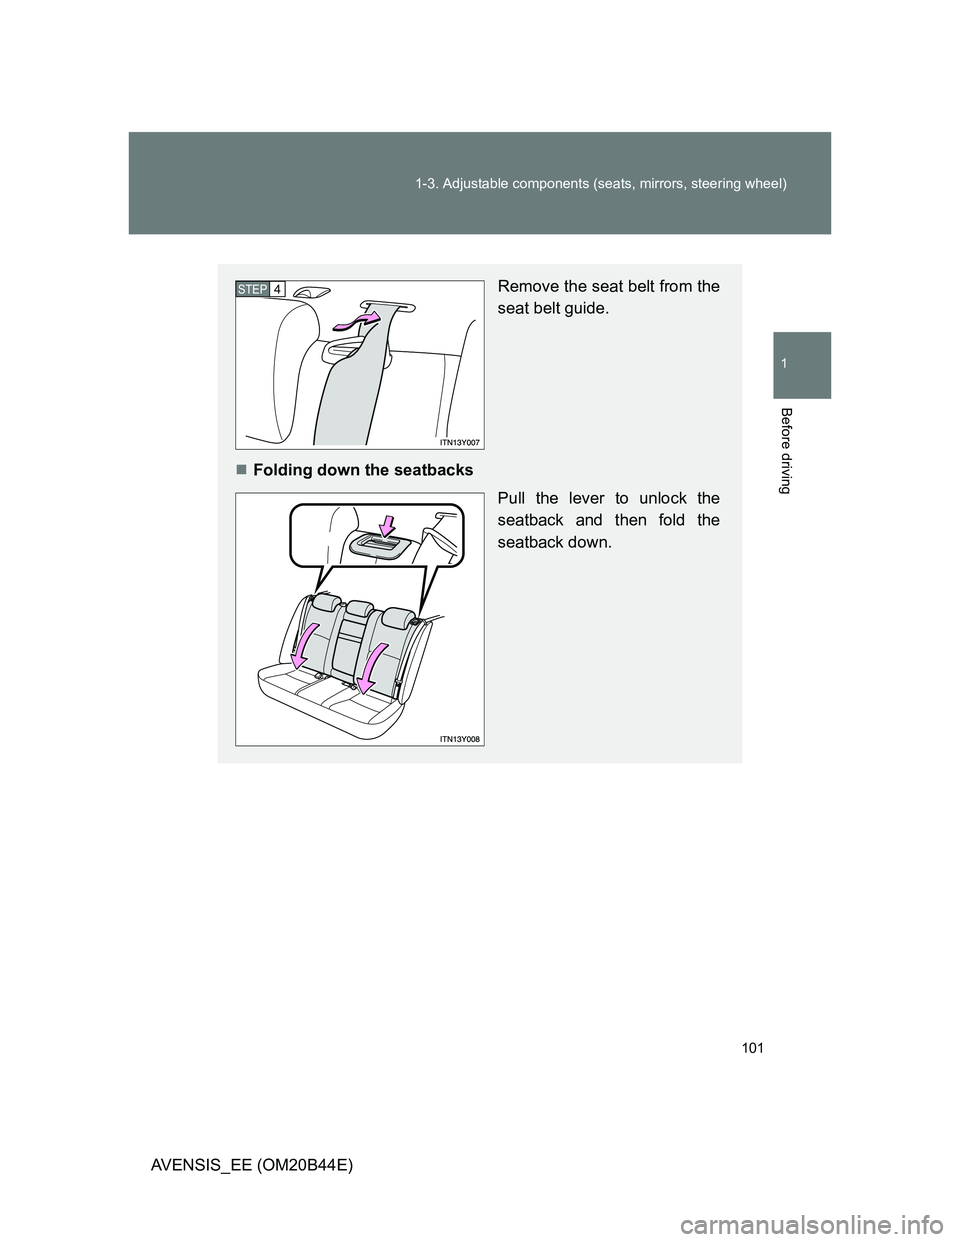 TOYOTA AVENSIS 2012  Owners Manual 101 1-3. Adjustable components (seats, mirrors, steering wheel)
1
Before driving
AVENSIS_EE (OM20B44E)
Remove the seat belt from the
seat belt guide.
Folding down the seatbacks
Pull the lever to un